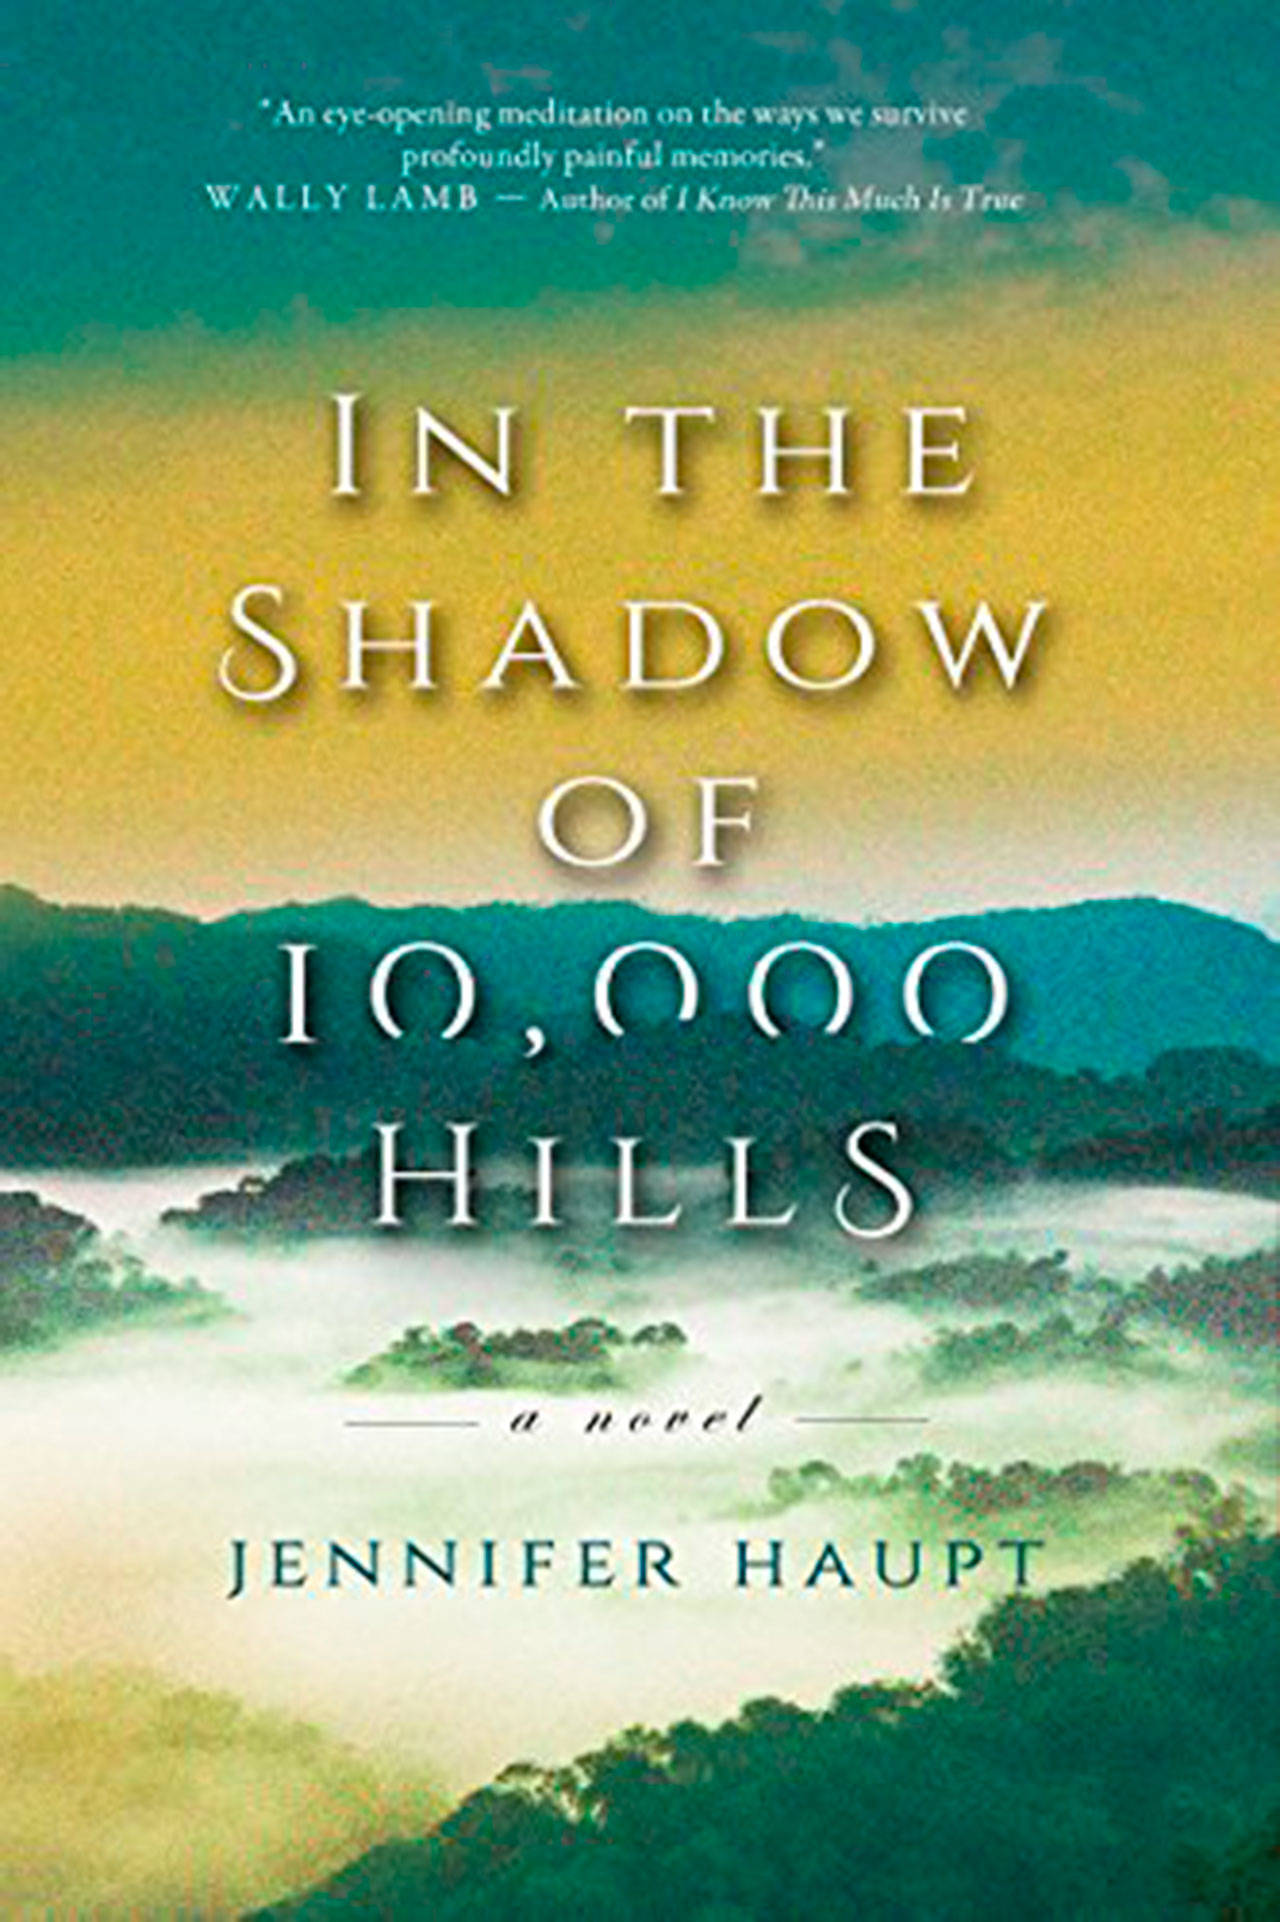 Image courtesy of Eagle Harbor Book Company | Bainbridge author Carol Cassella and Seattle author Jennifer Haupt will gather to chat about Haupt’s new book “In the Shadow of 10,000 Hills,” at Eagle Harbor Book Company at 3 p.m. Sunday, April 8.